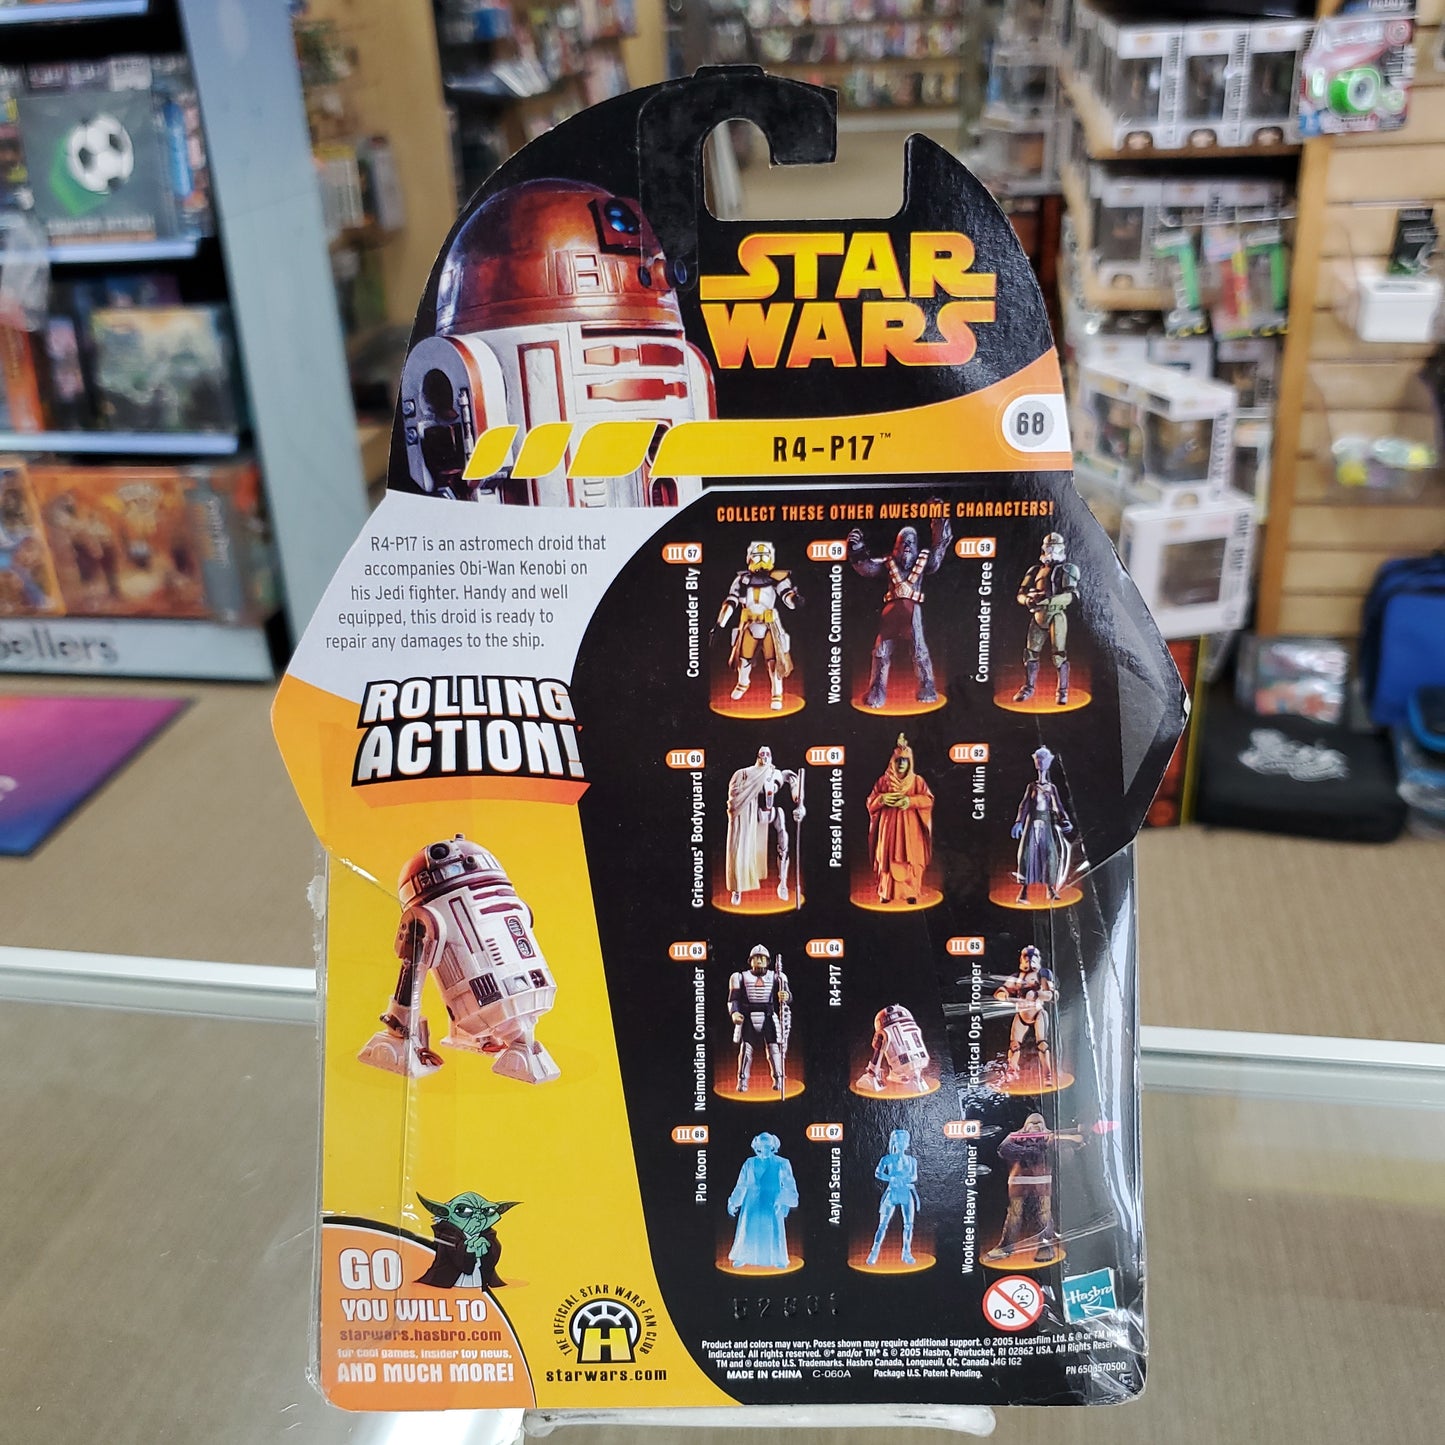 R4-P17 (Rolling Action) - Star Wars Revenge of the Sith Action Figure